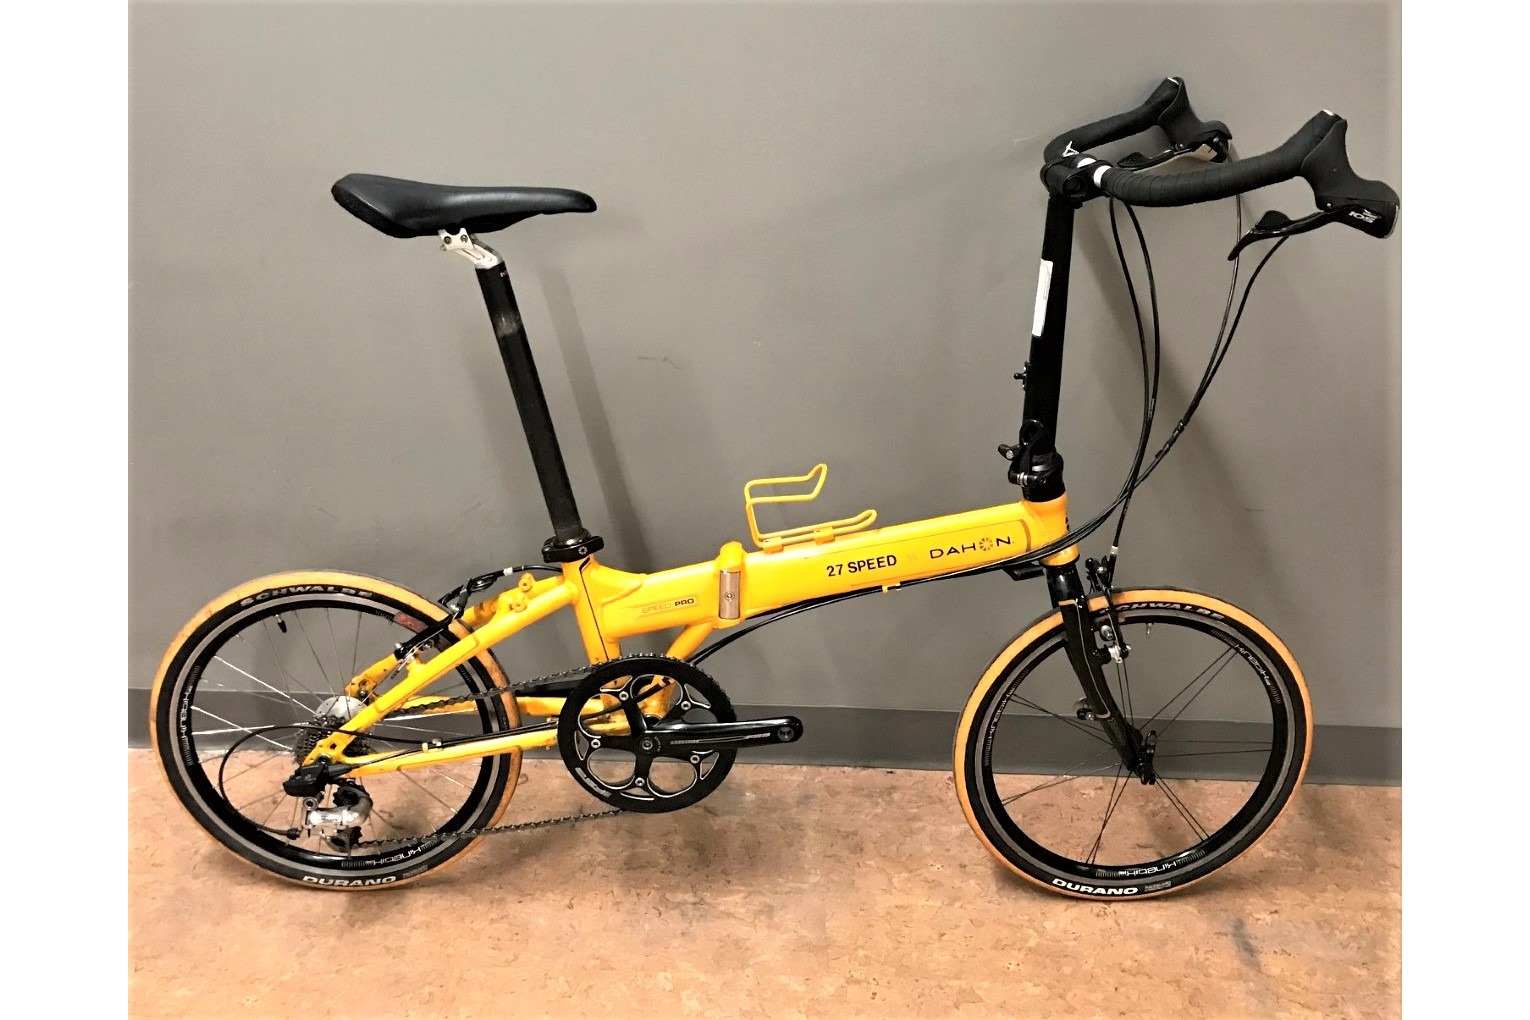 USED Dahon 27speed Yellow with spare Tires/Tubes ✪ Revolution Cycle